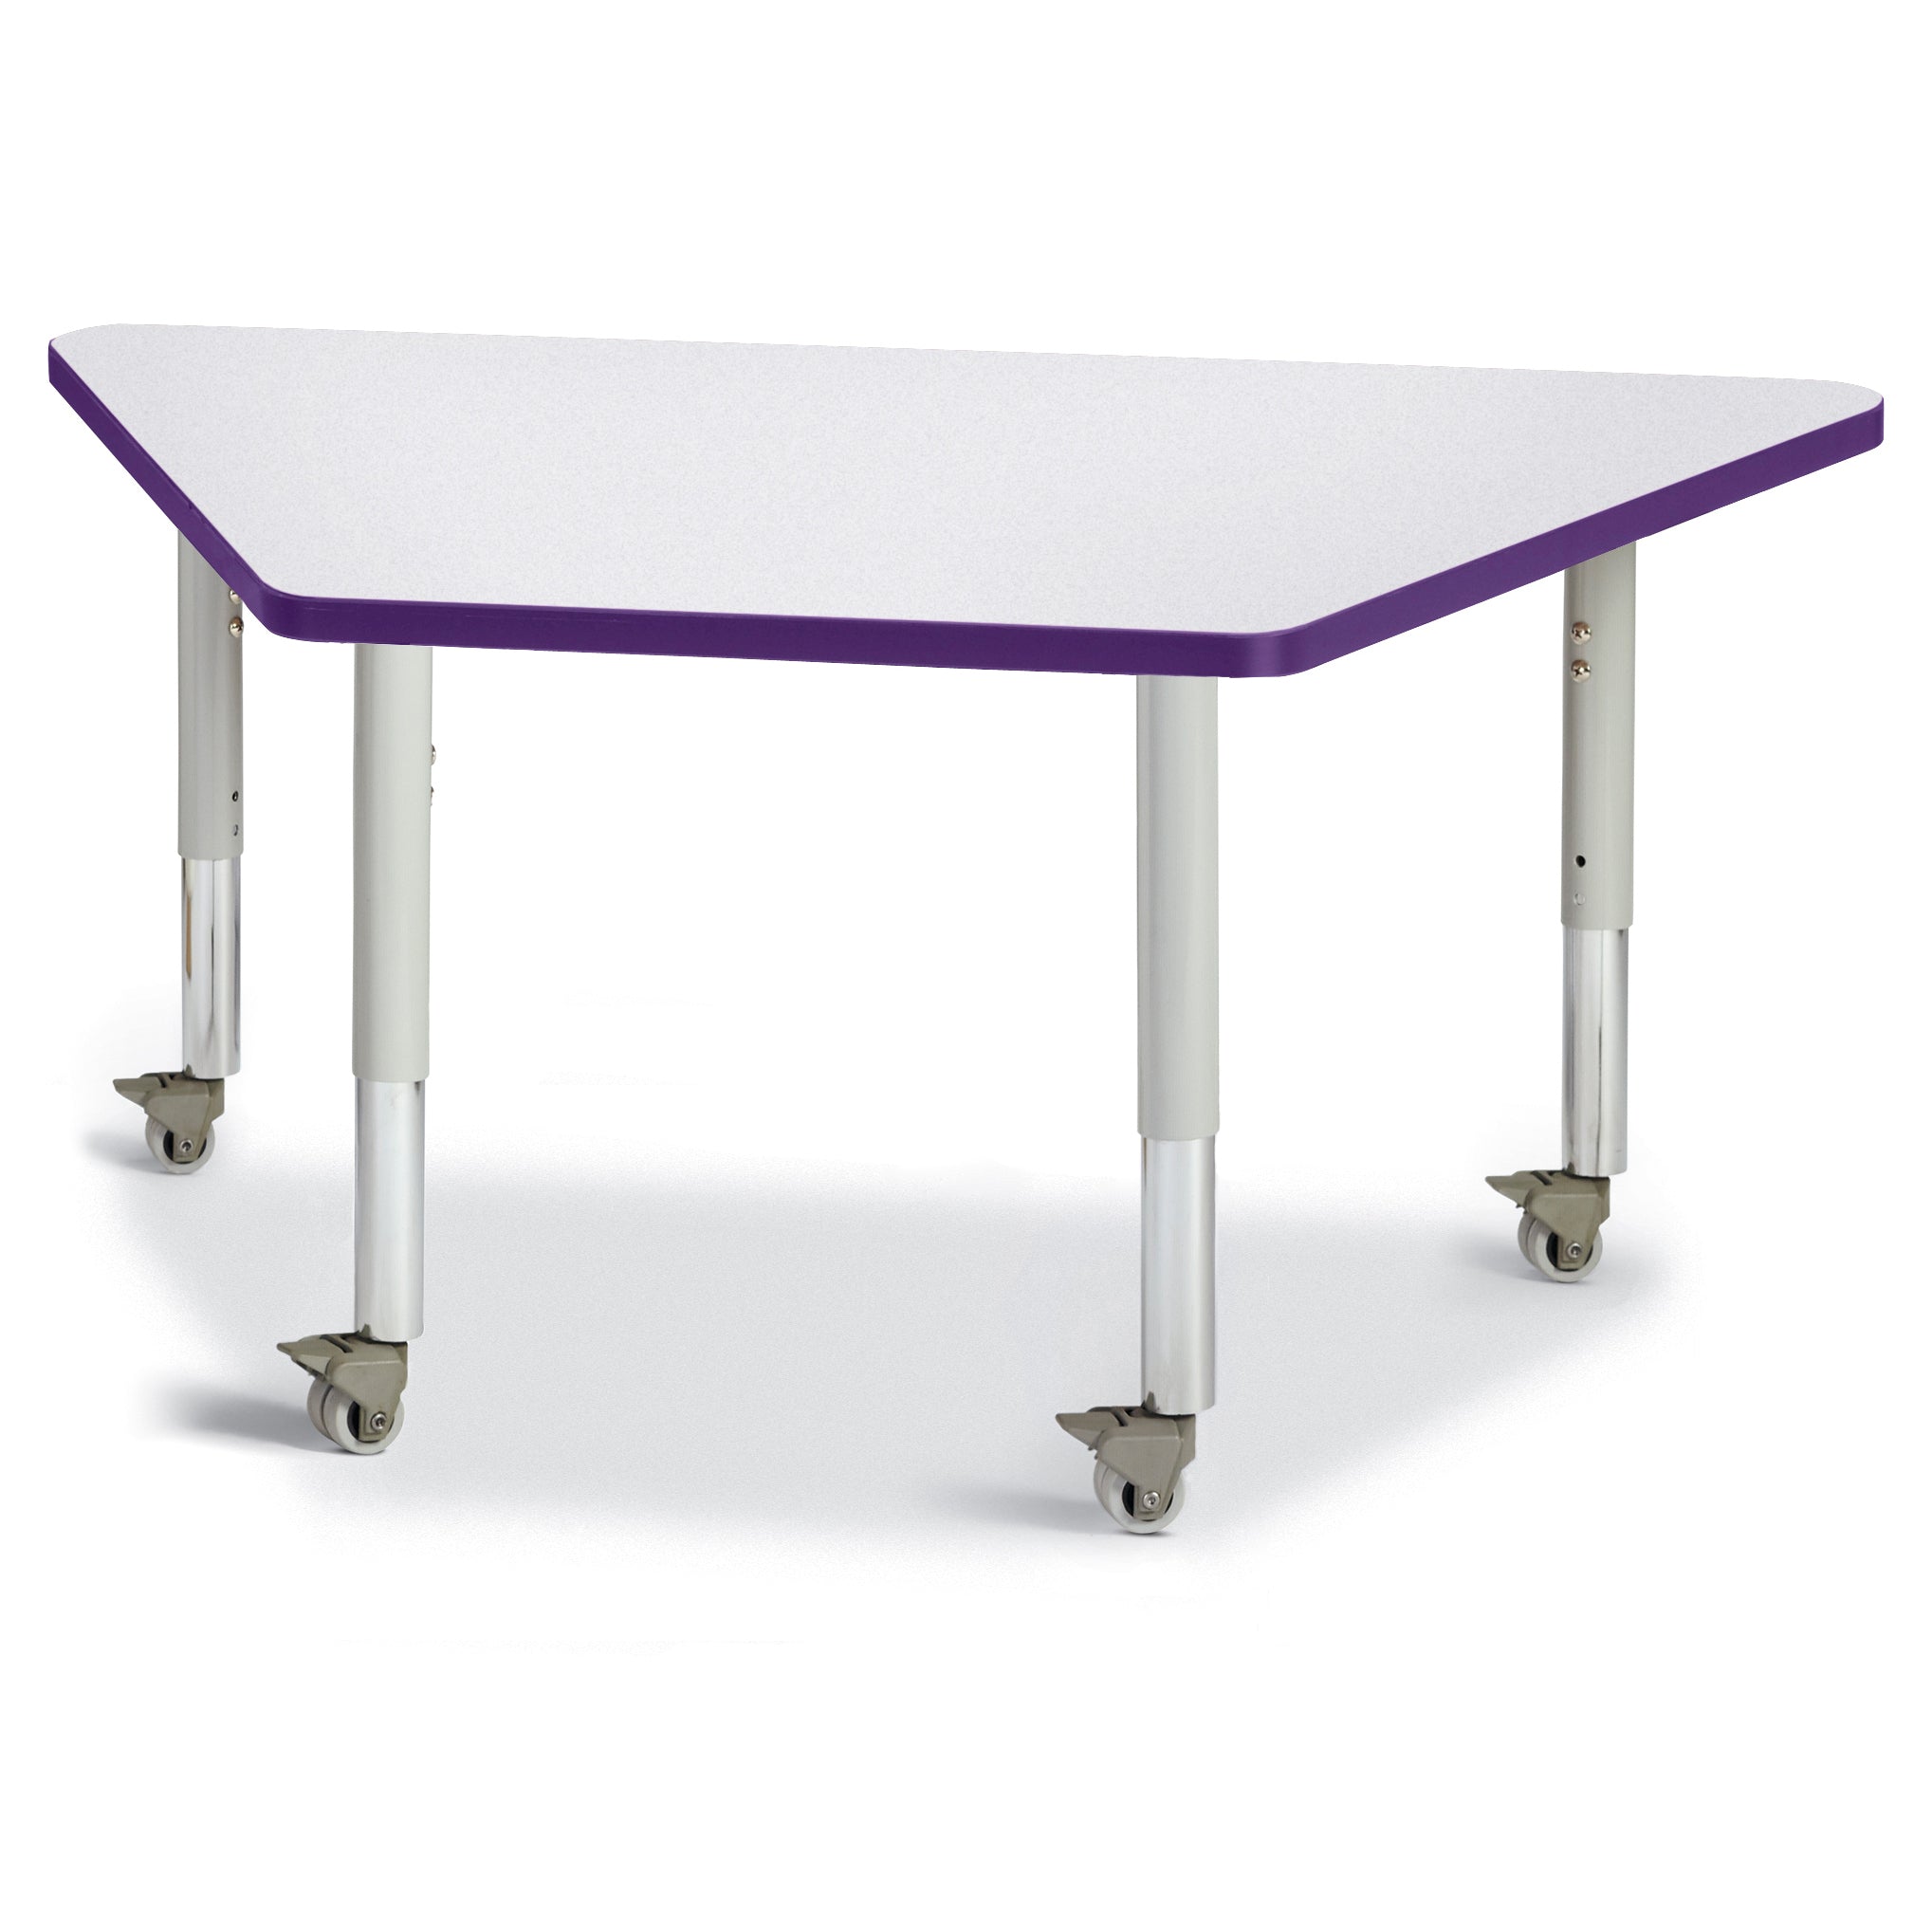 6438JCM004, Berries Trapezoid Activity Tables - 24" X 48", Mobile - Freckled Gray/Purple/Gray